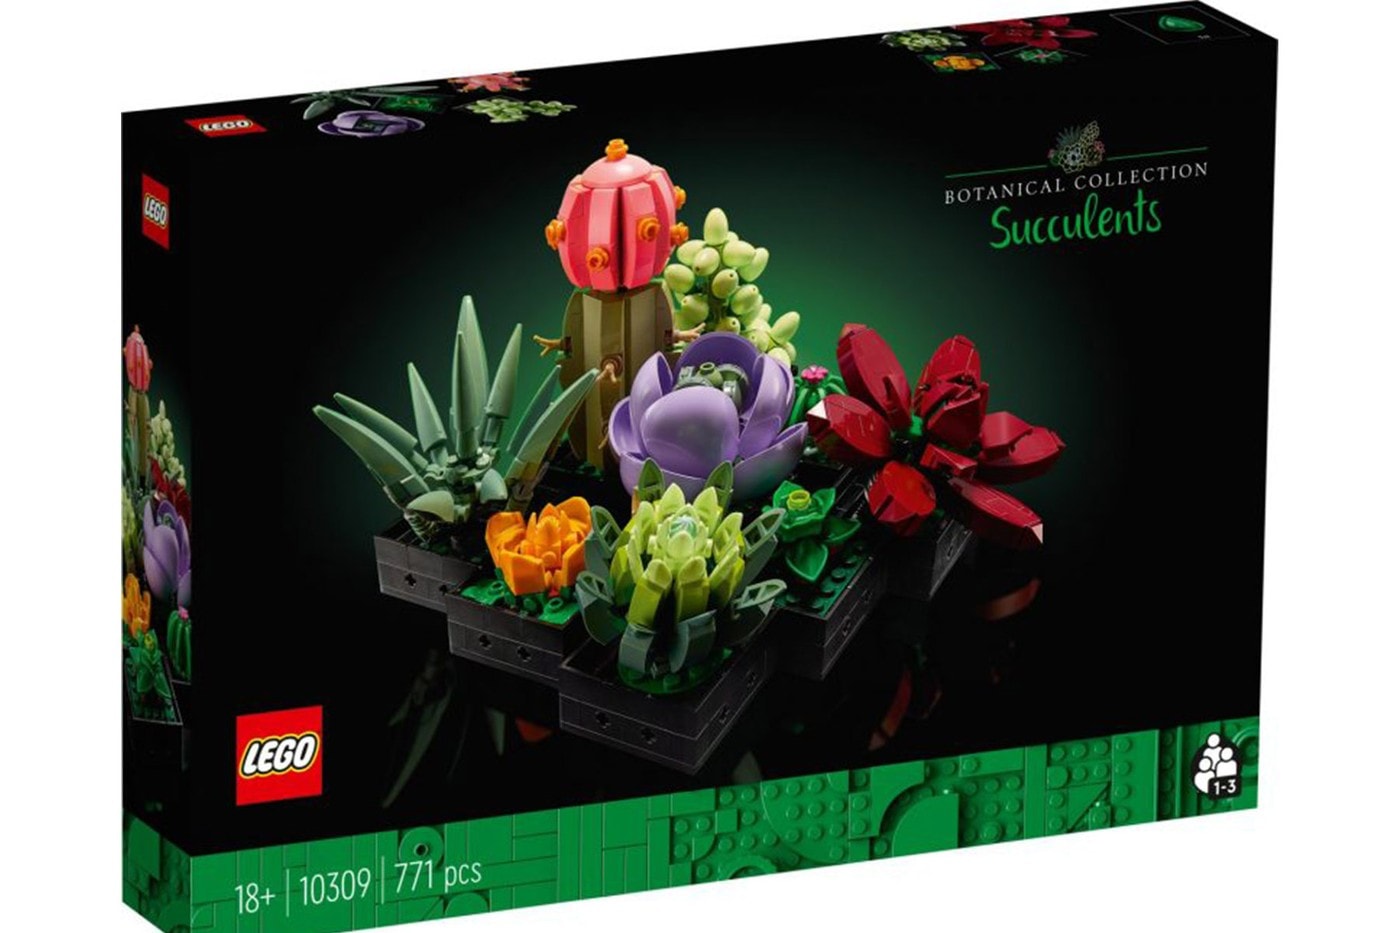 LEGO Orchid Review! 2022 Botanical Collection 